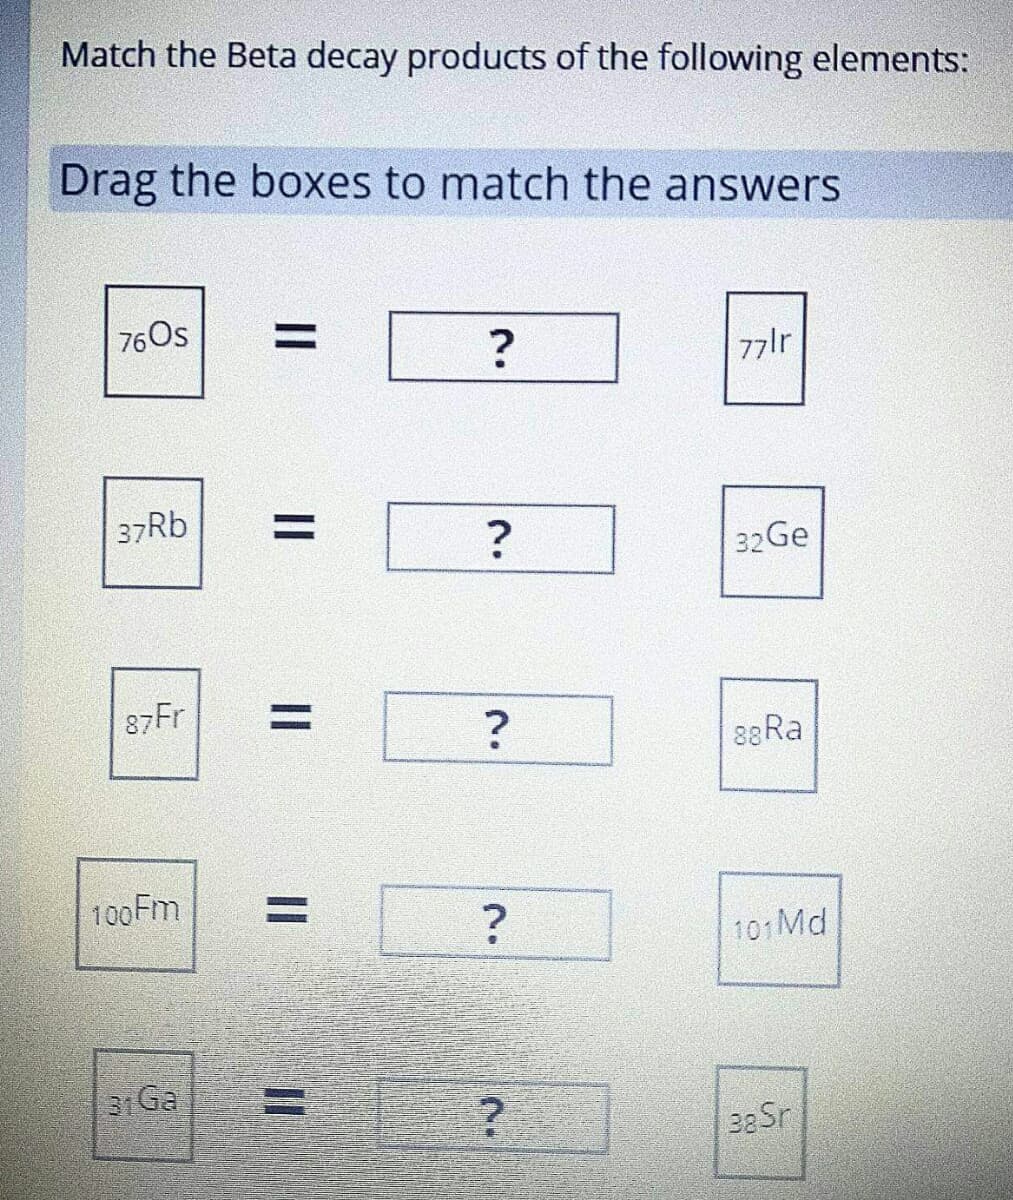 Match the Beta decay products of the following elements:
Drag the boxes to match the answers
76Os
%|
77lr
37RB
%D
32Ge
87Fr
%3D
88RA
100FM
101 Md
31 Ga
II
